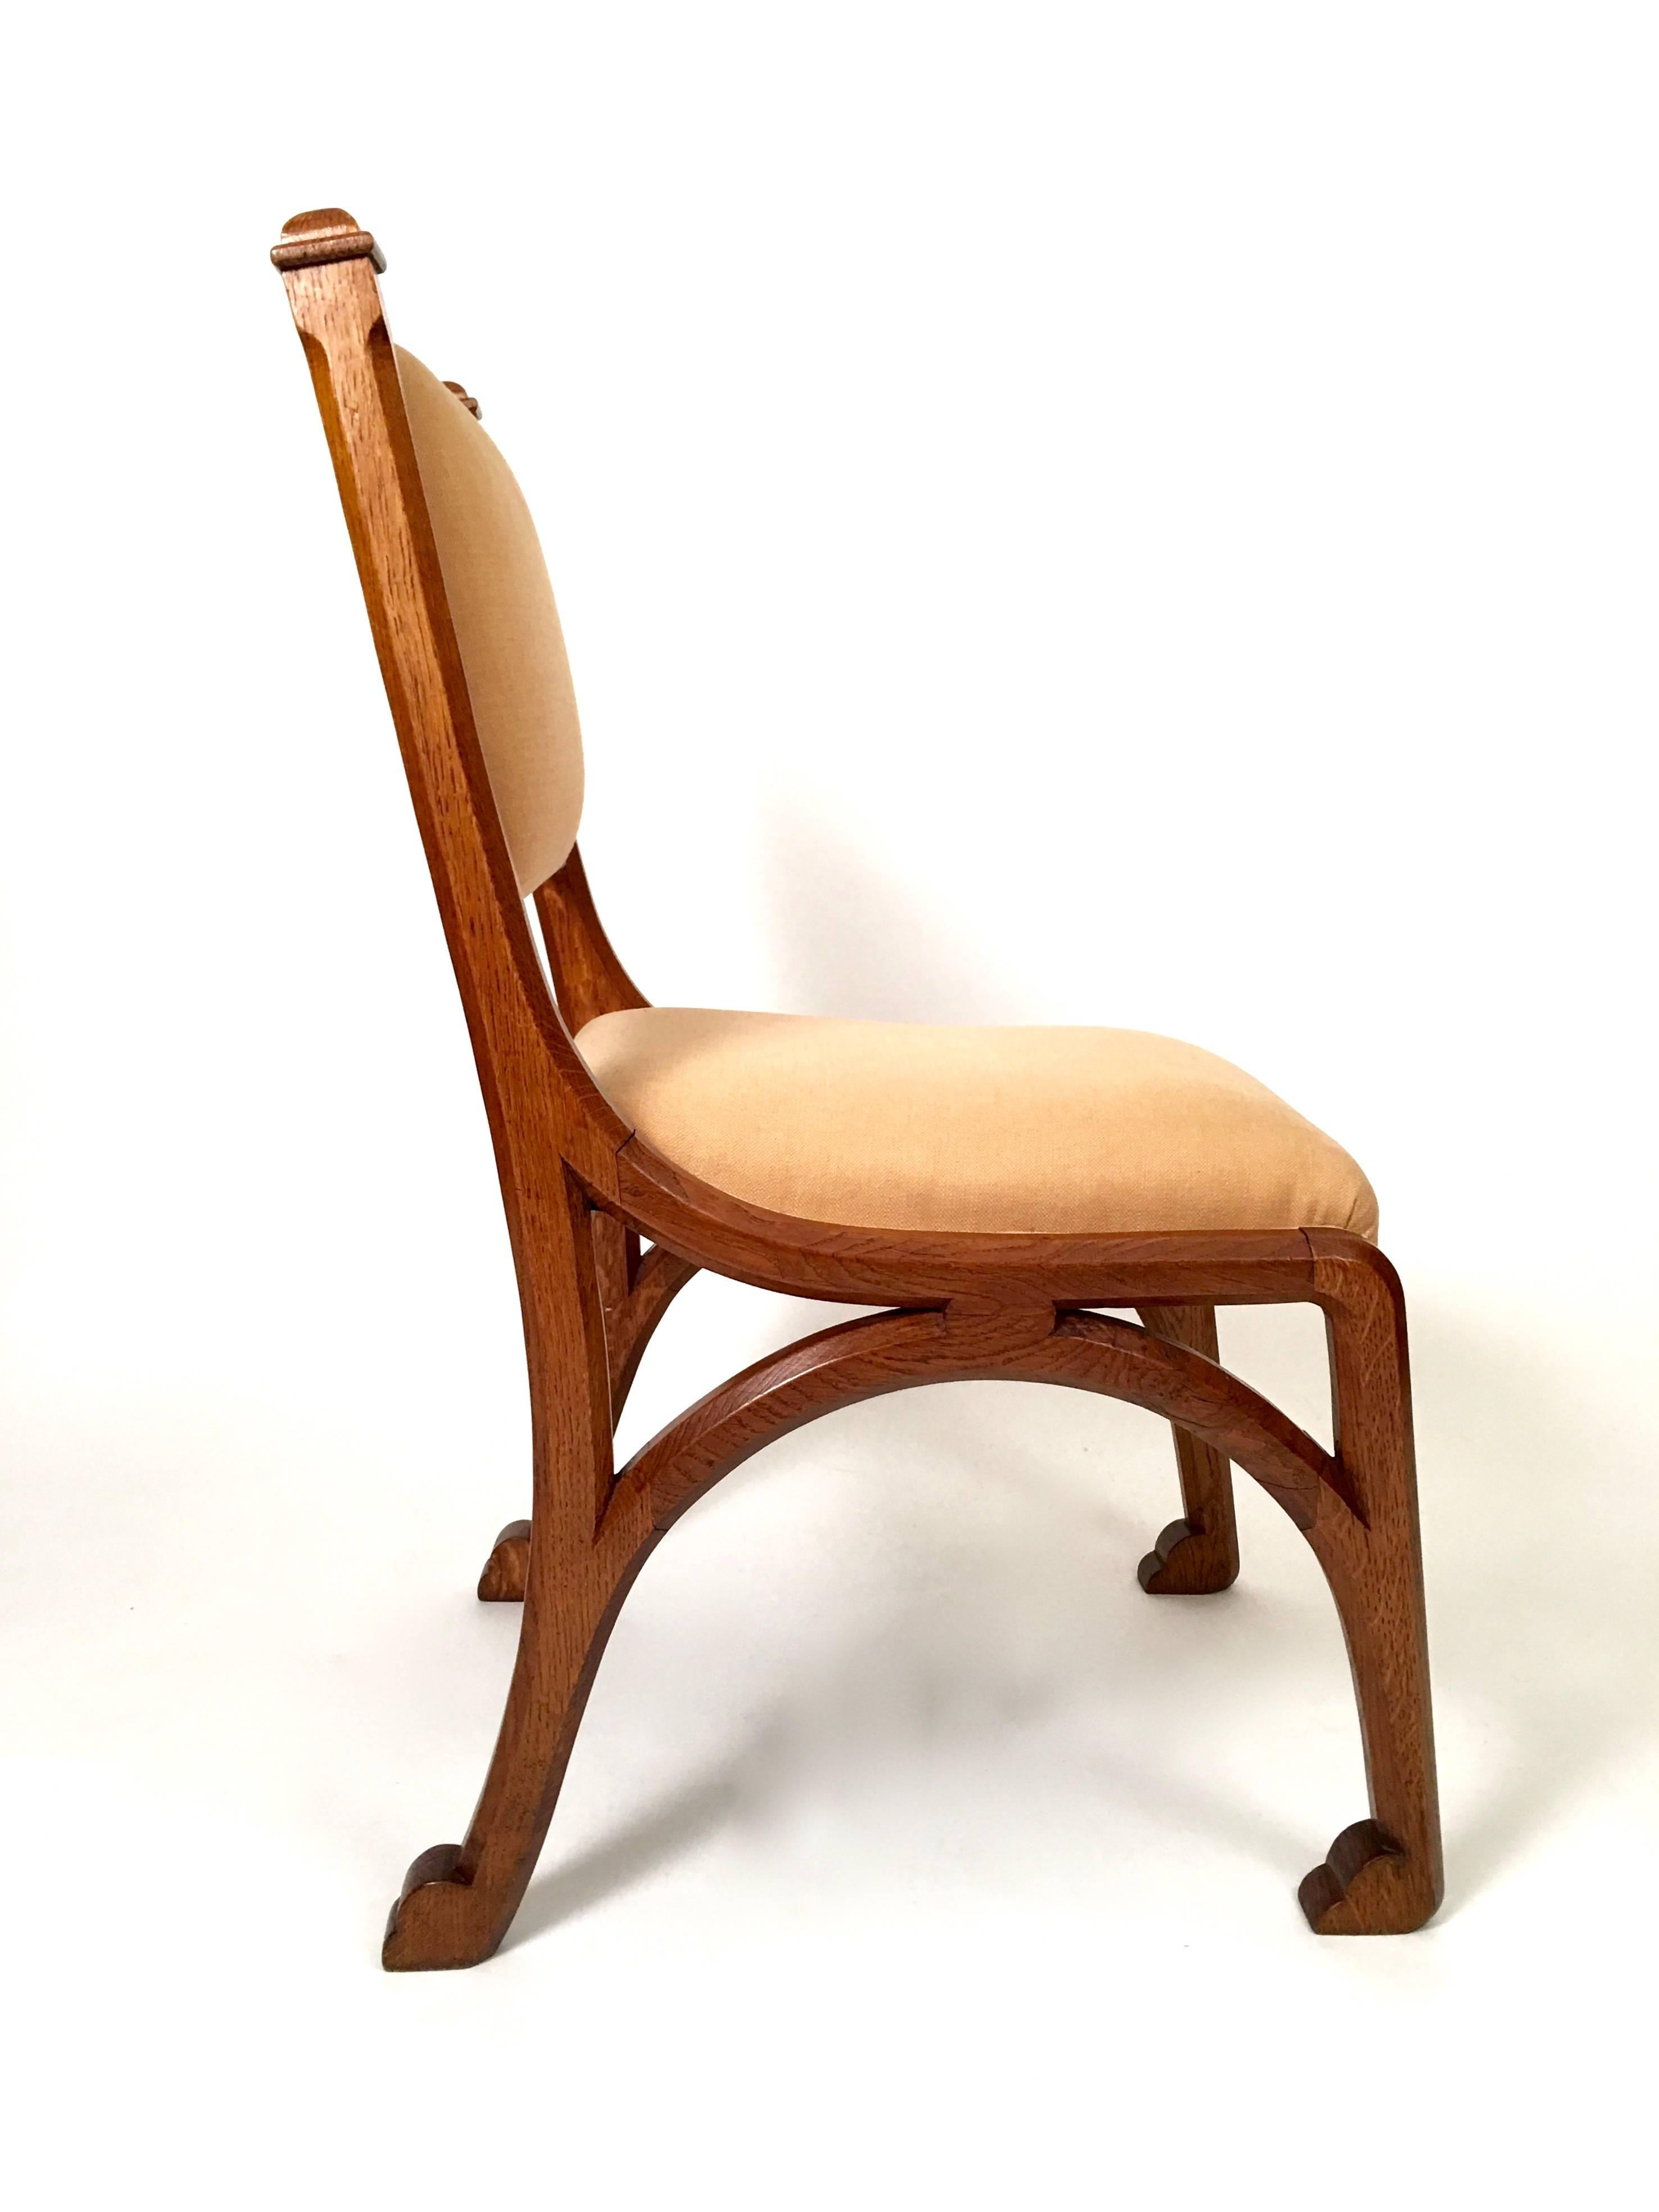 An English Arts and Crafts period Gothic Revival upholstered chair in carved oak, in the manner of A.W.N. Pugin, with wonderful lines, the square section supports and legs all sinuously joined and terminating in stylized backward facing animal paw